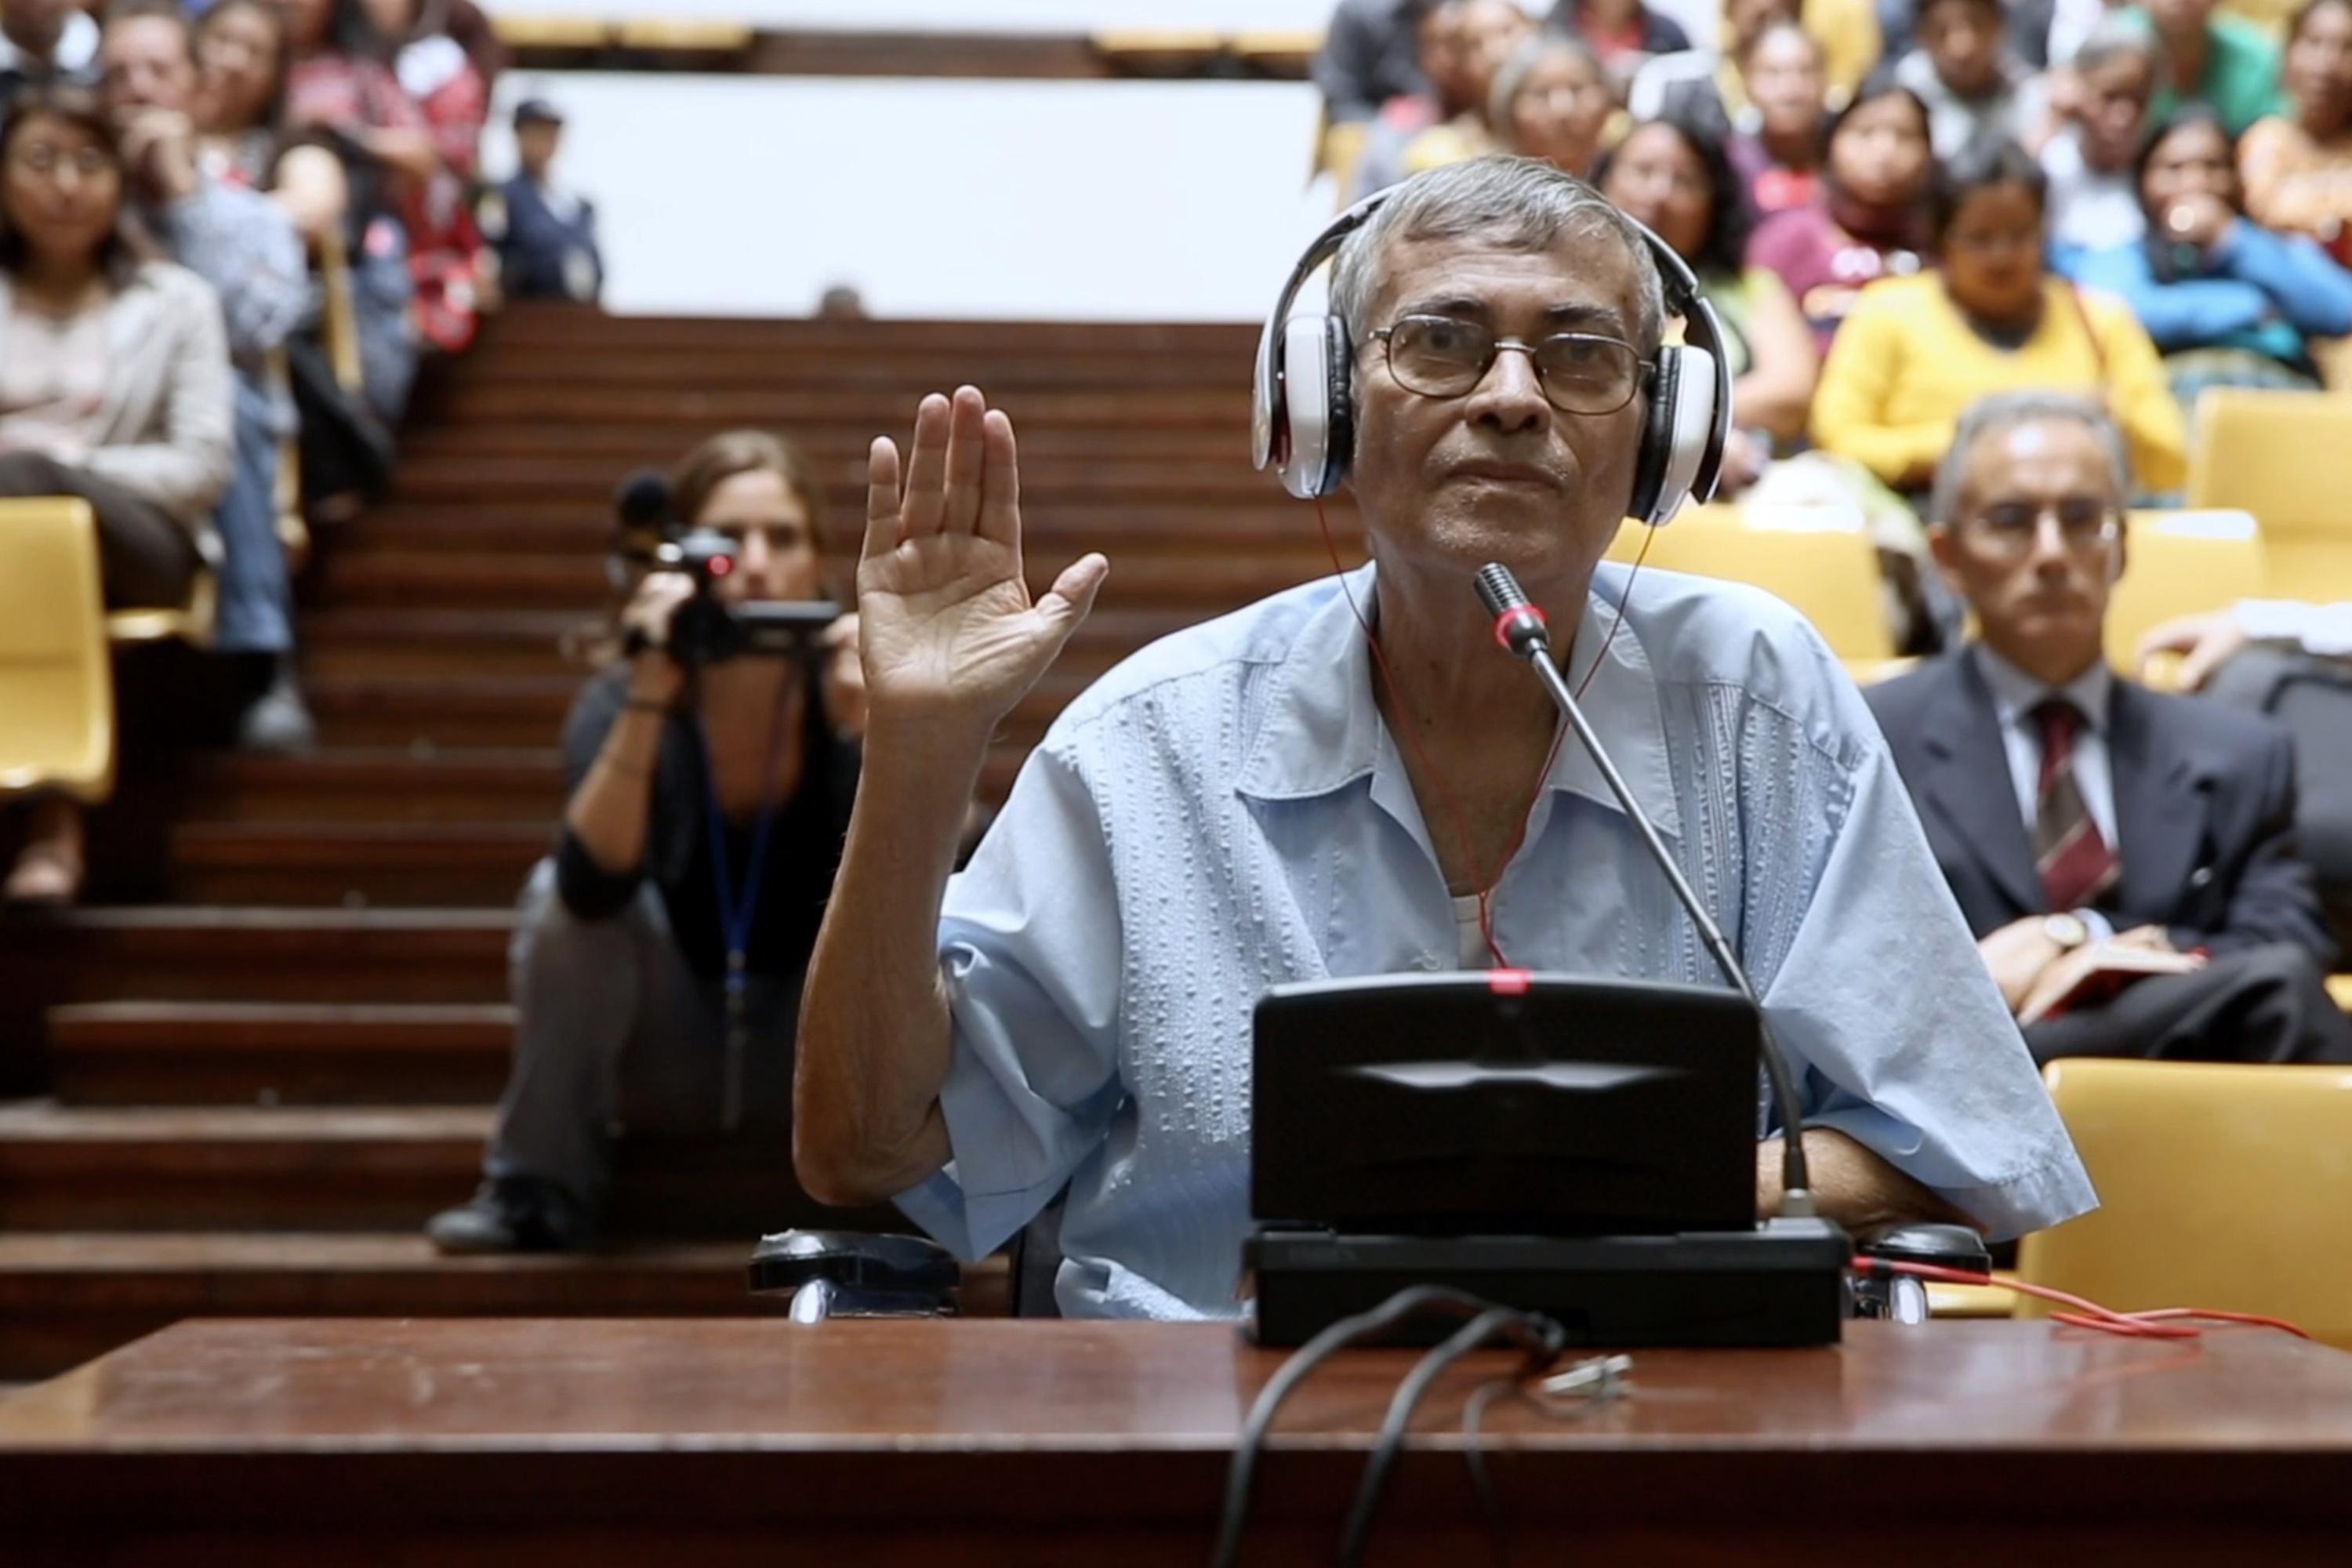 In October 2014 the professor Elías Barahona testified in Guatemalan court in the historic trial for the burning of the Spanish Embassy in 1980, when he was undercover as press secretary for Minister of Governance Donaldo Álvarez Ruiz. Photo: Courtesy Anaïs Taracena